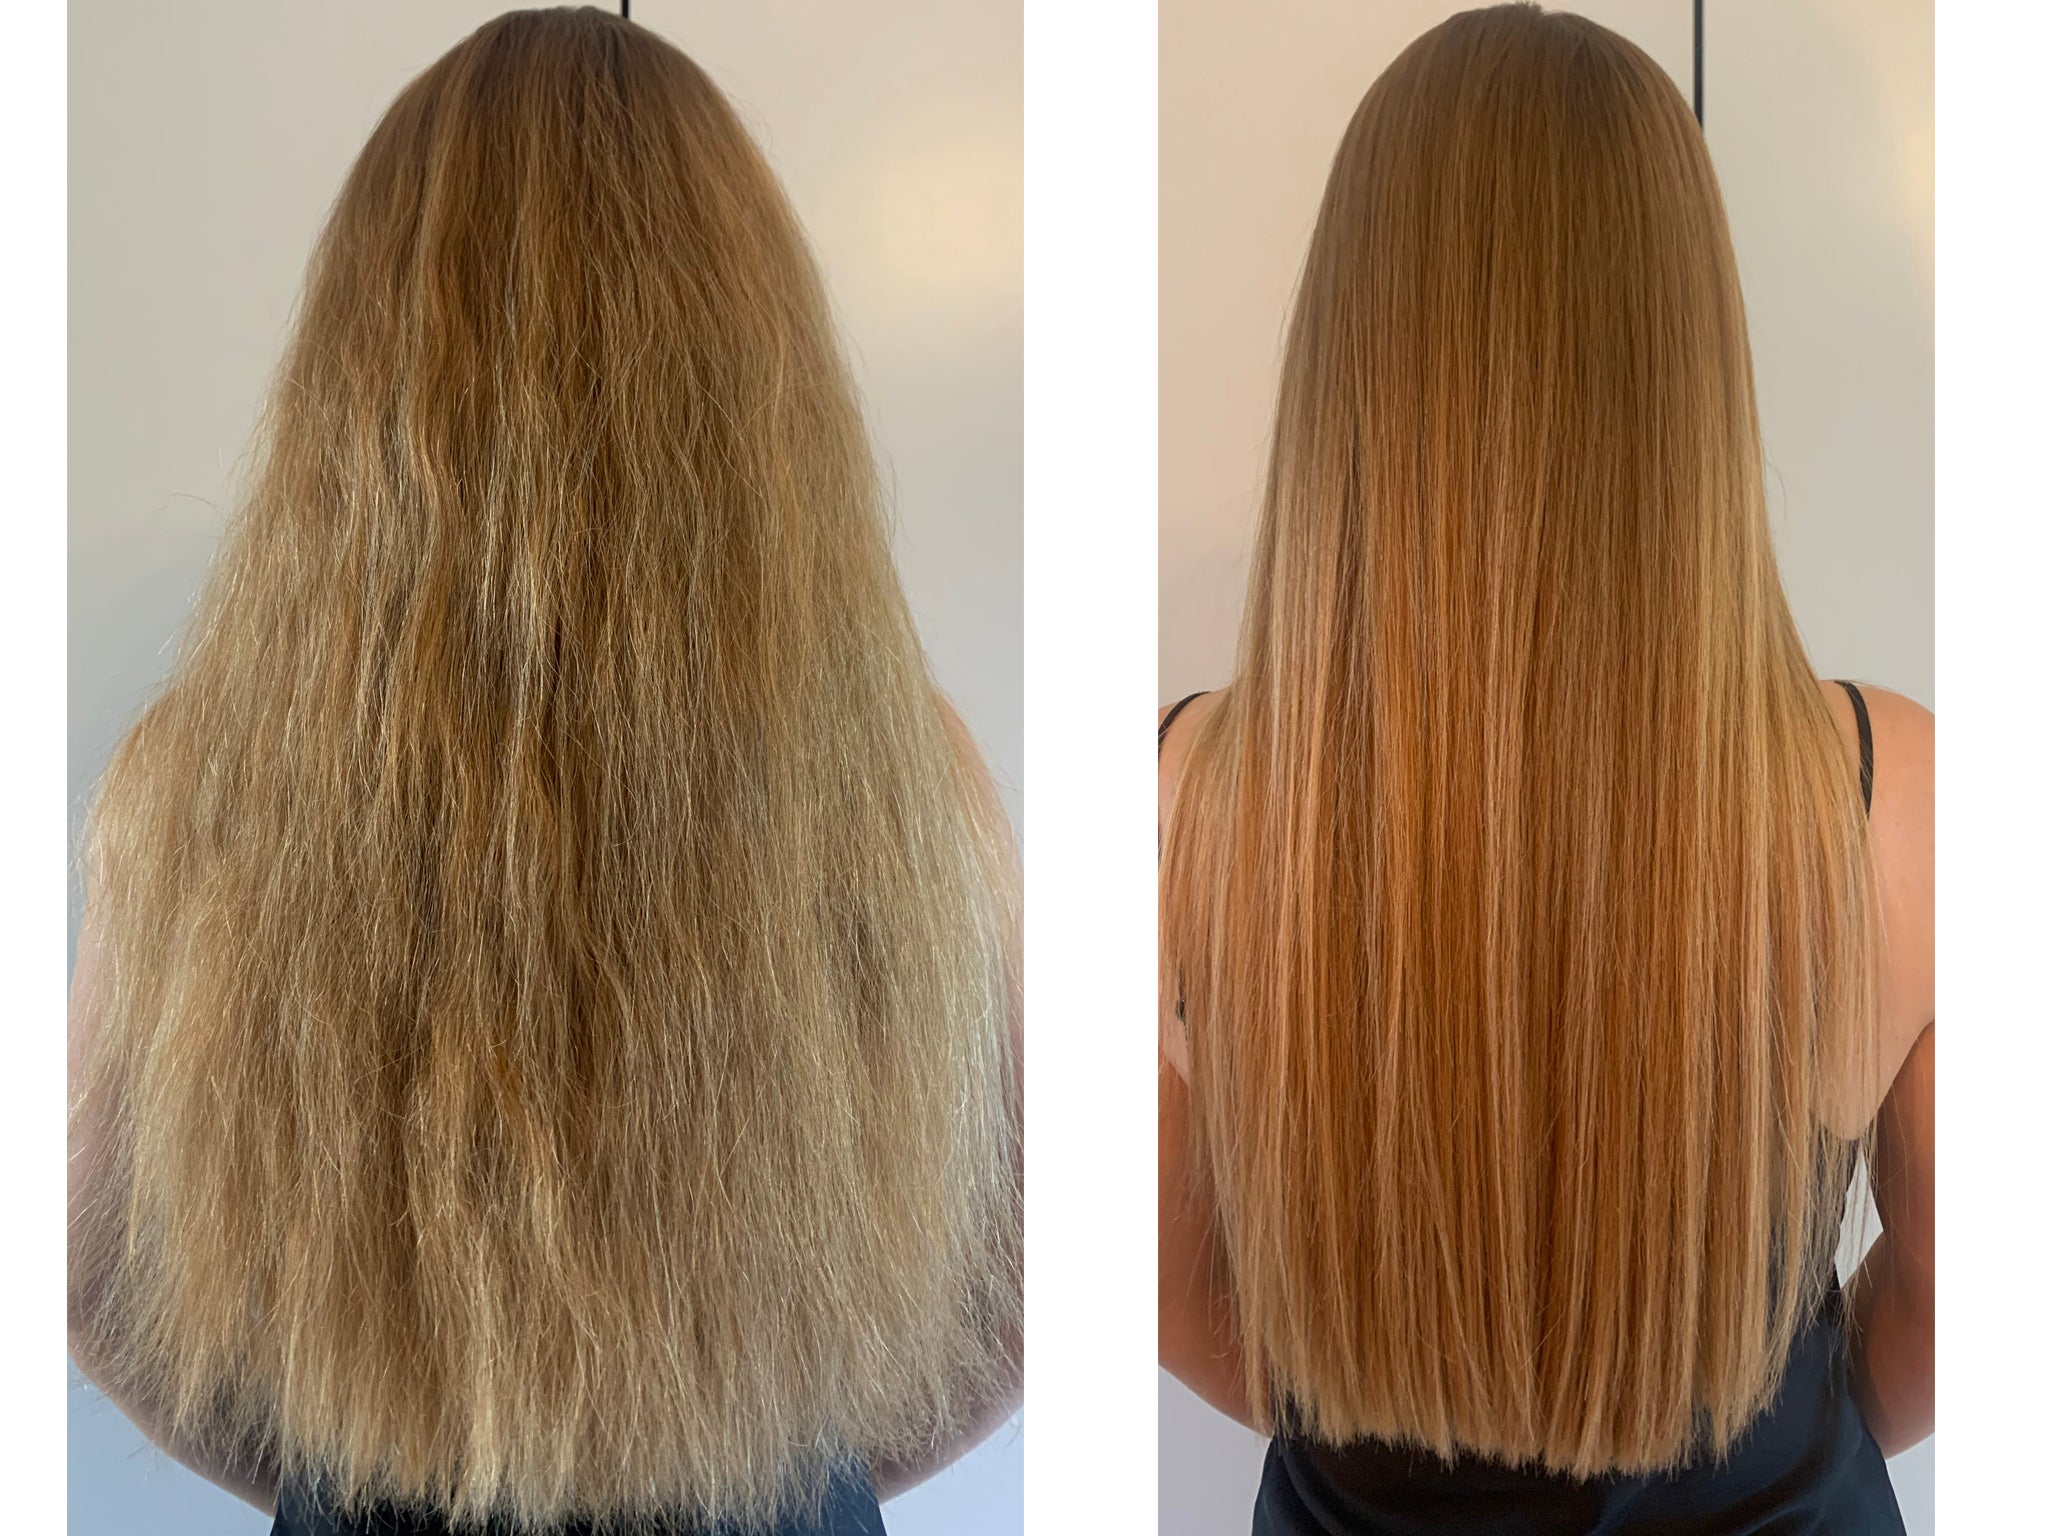 Owow at-home keratin hair treatment kit review 2021 | The Independent